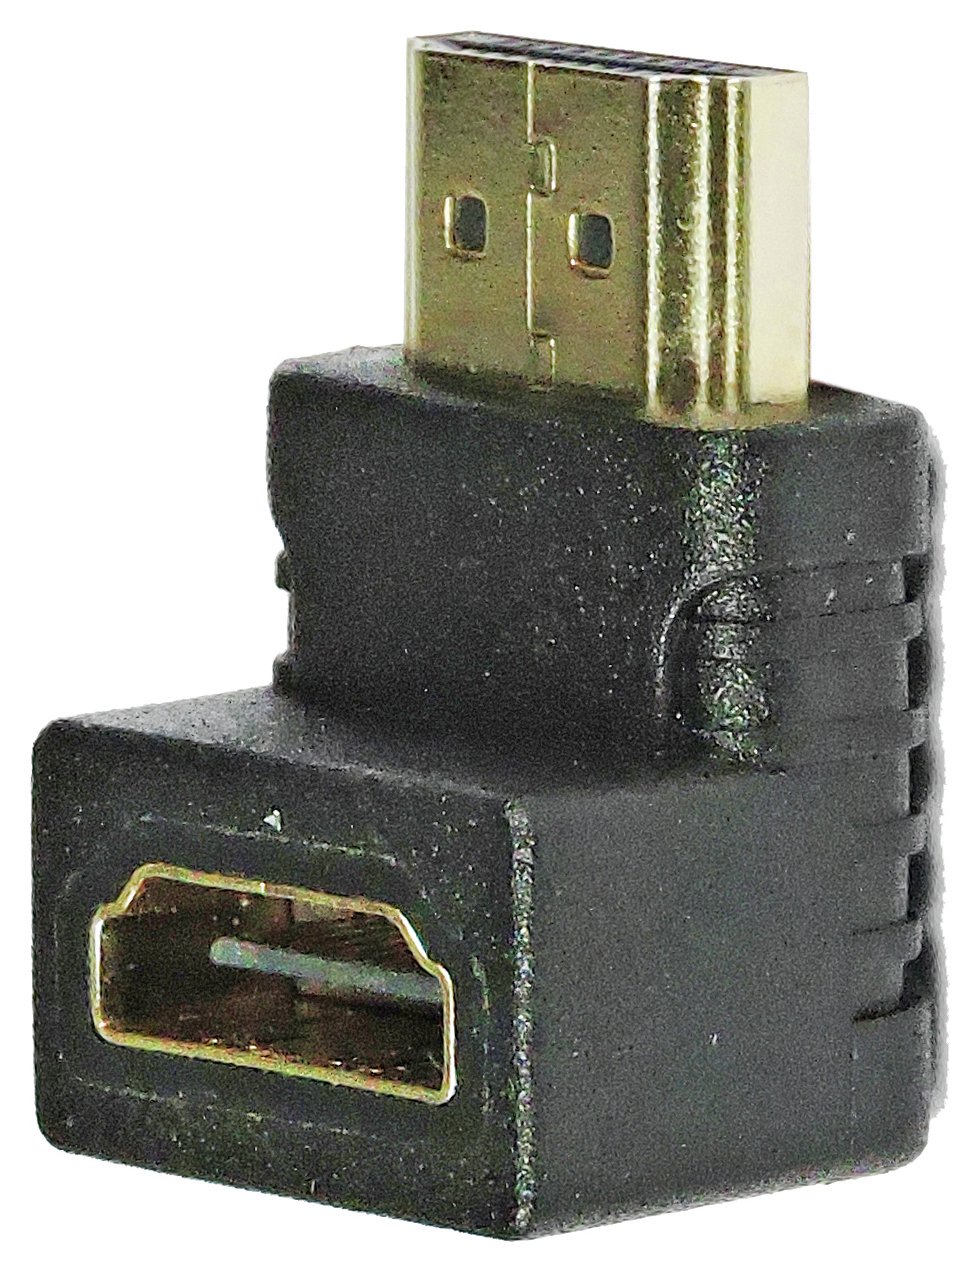 Angled HDMI Connector Review